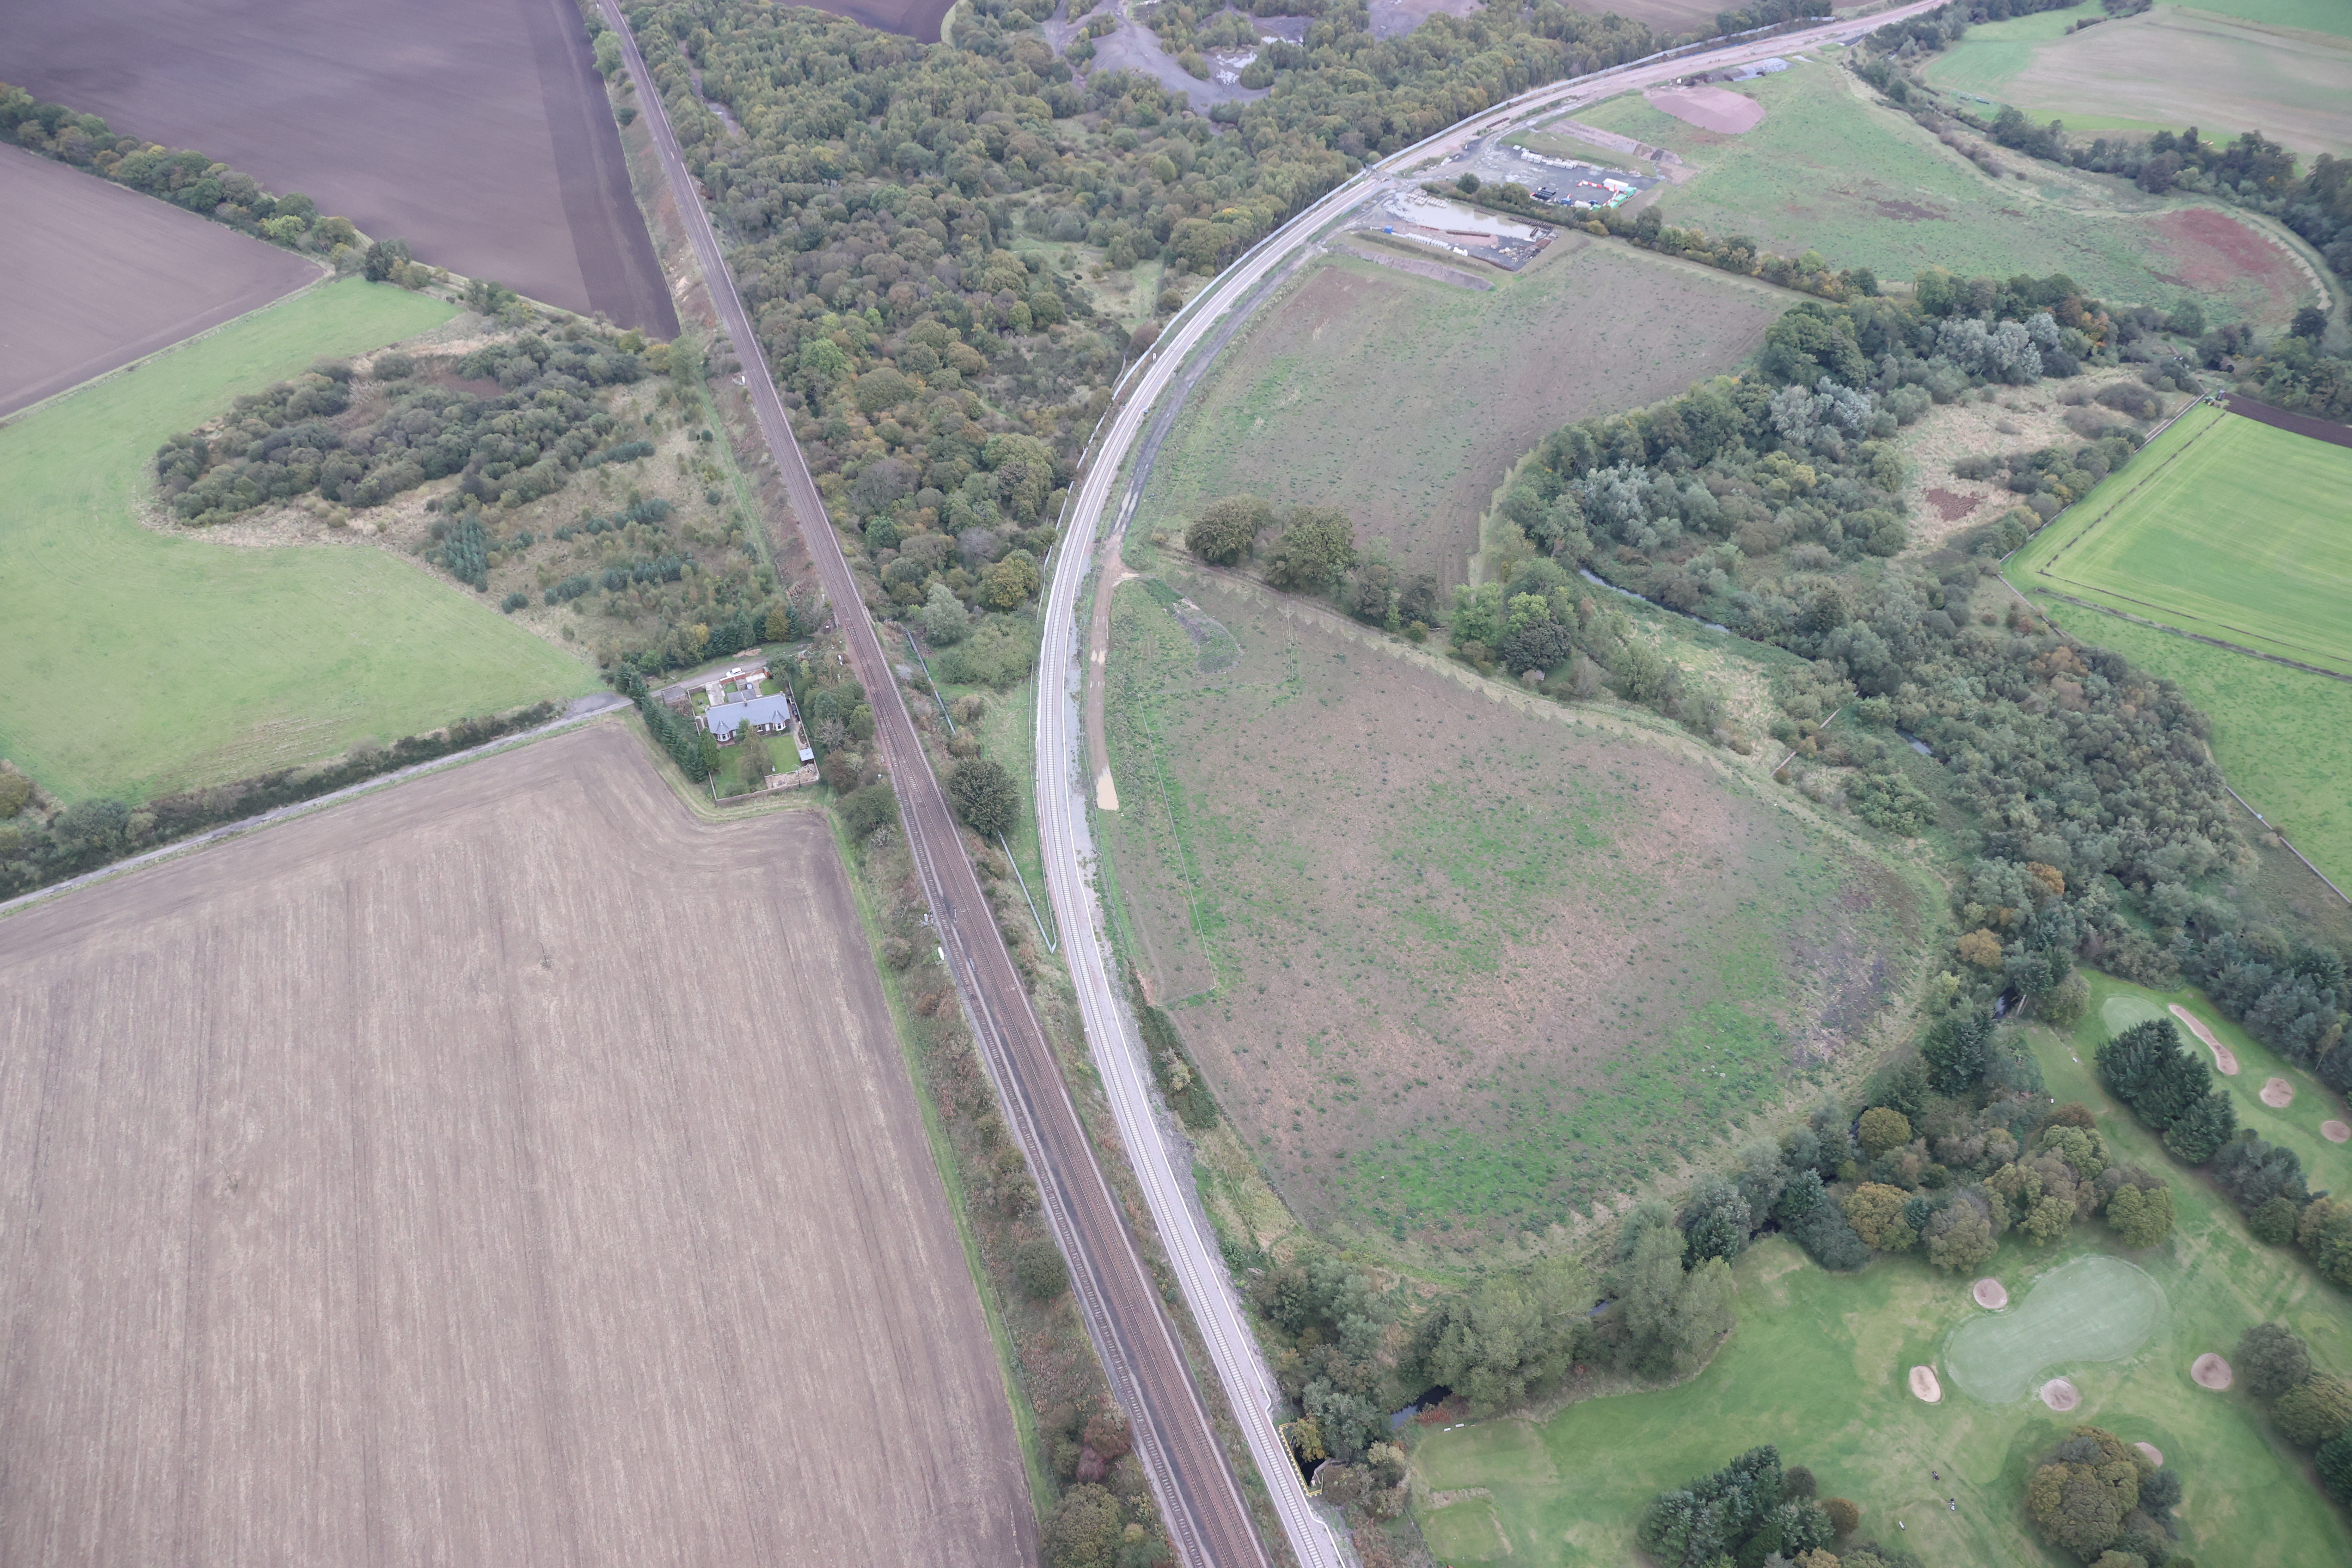 Thornton junction connects onto the new Levenmouth branch